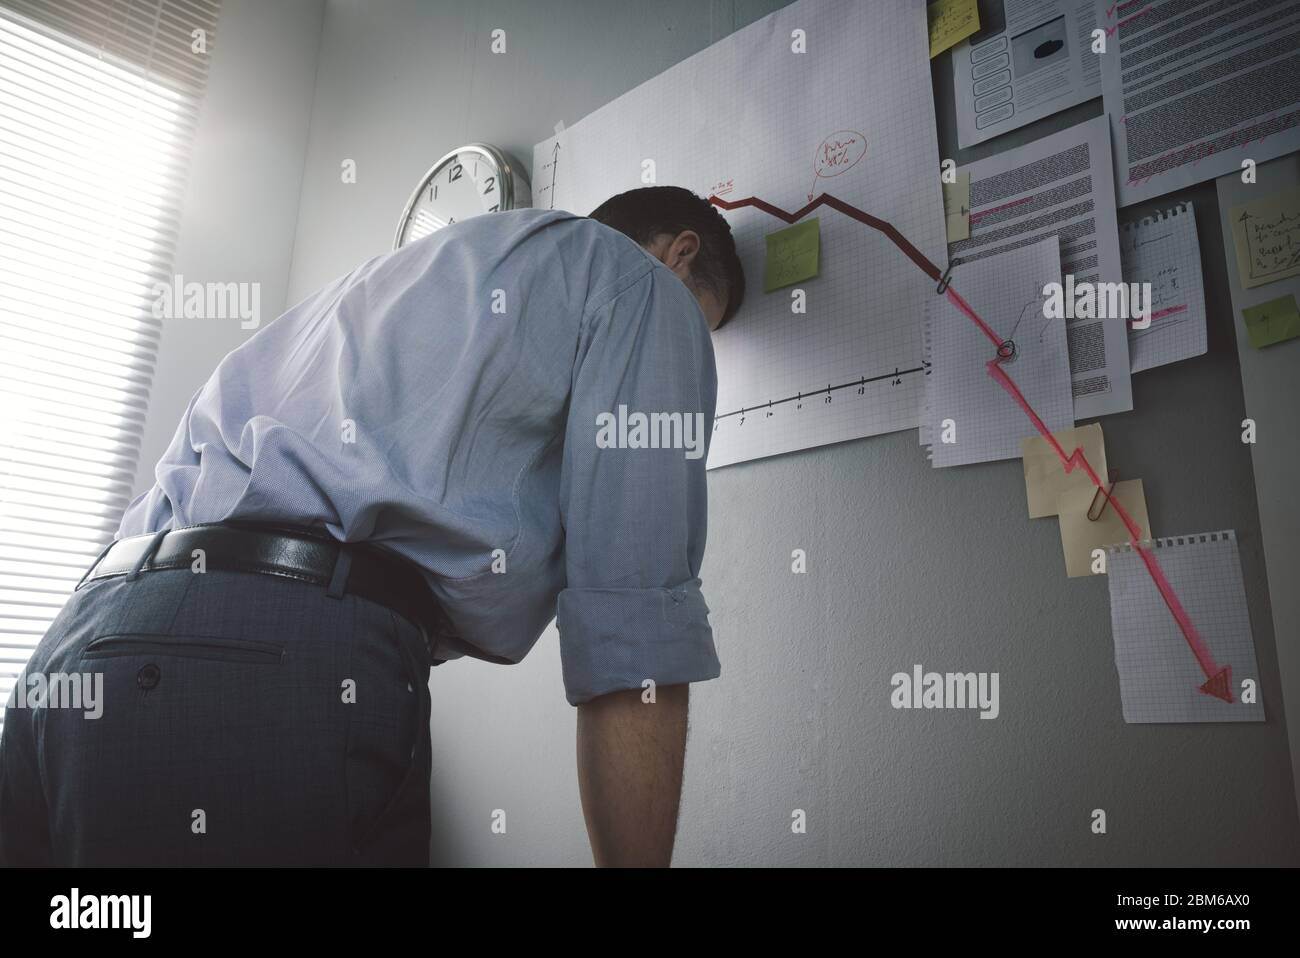 Desperate businessman with head down against a wall and financial chart with arrow going downwards. Stock Photo